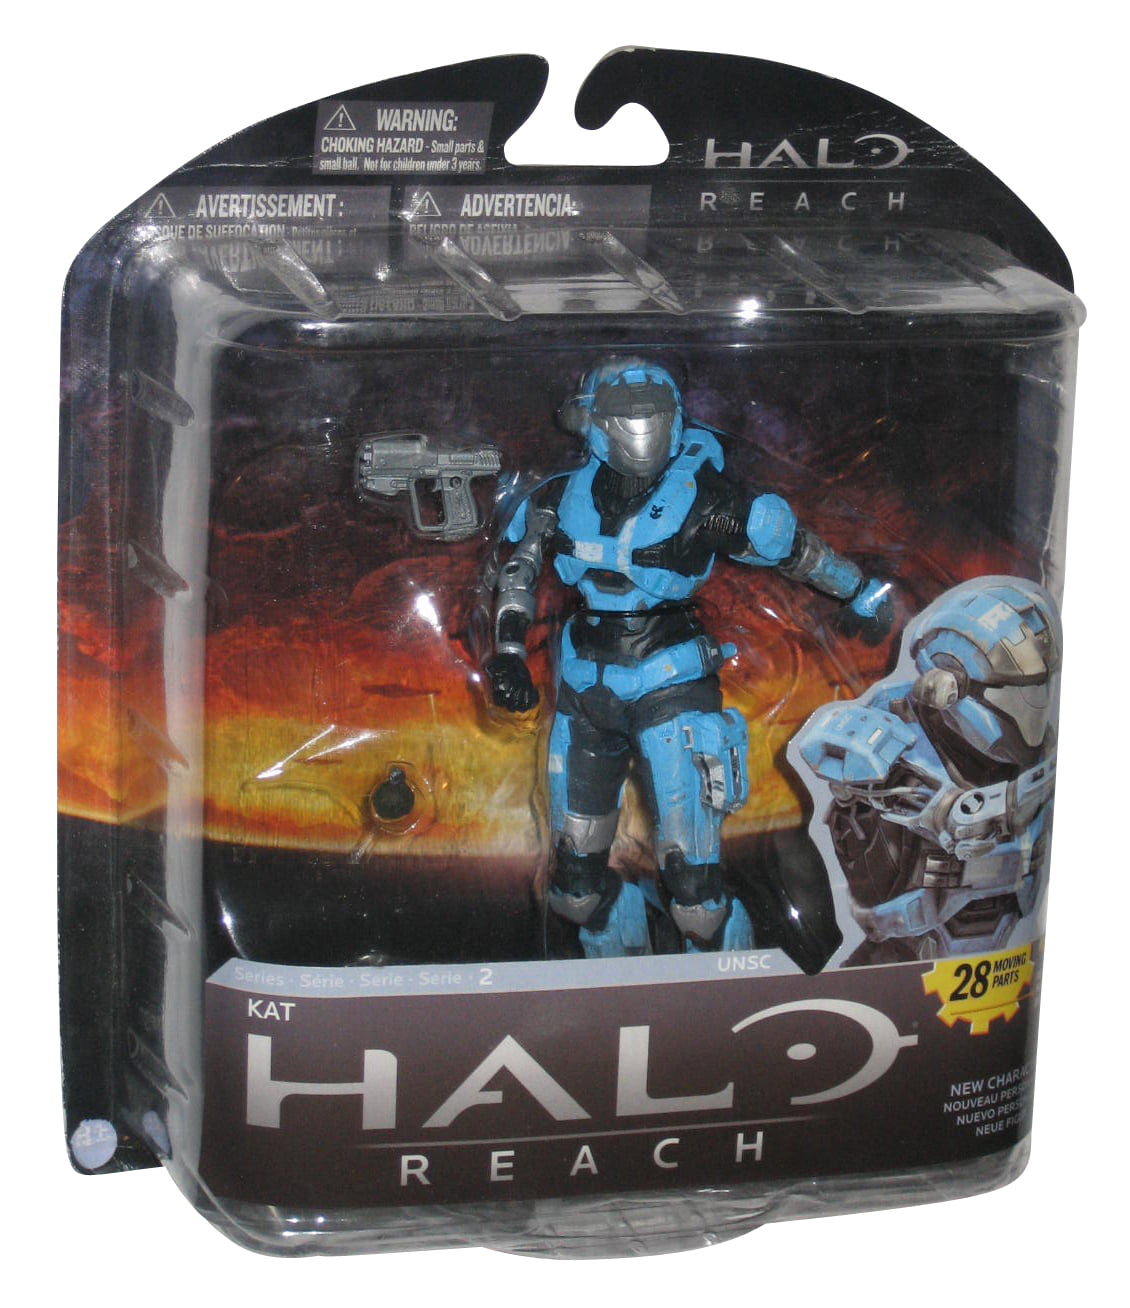 Halo Reach Kat figure, which to get? : r/ActionFigures